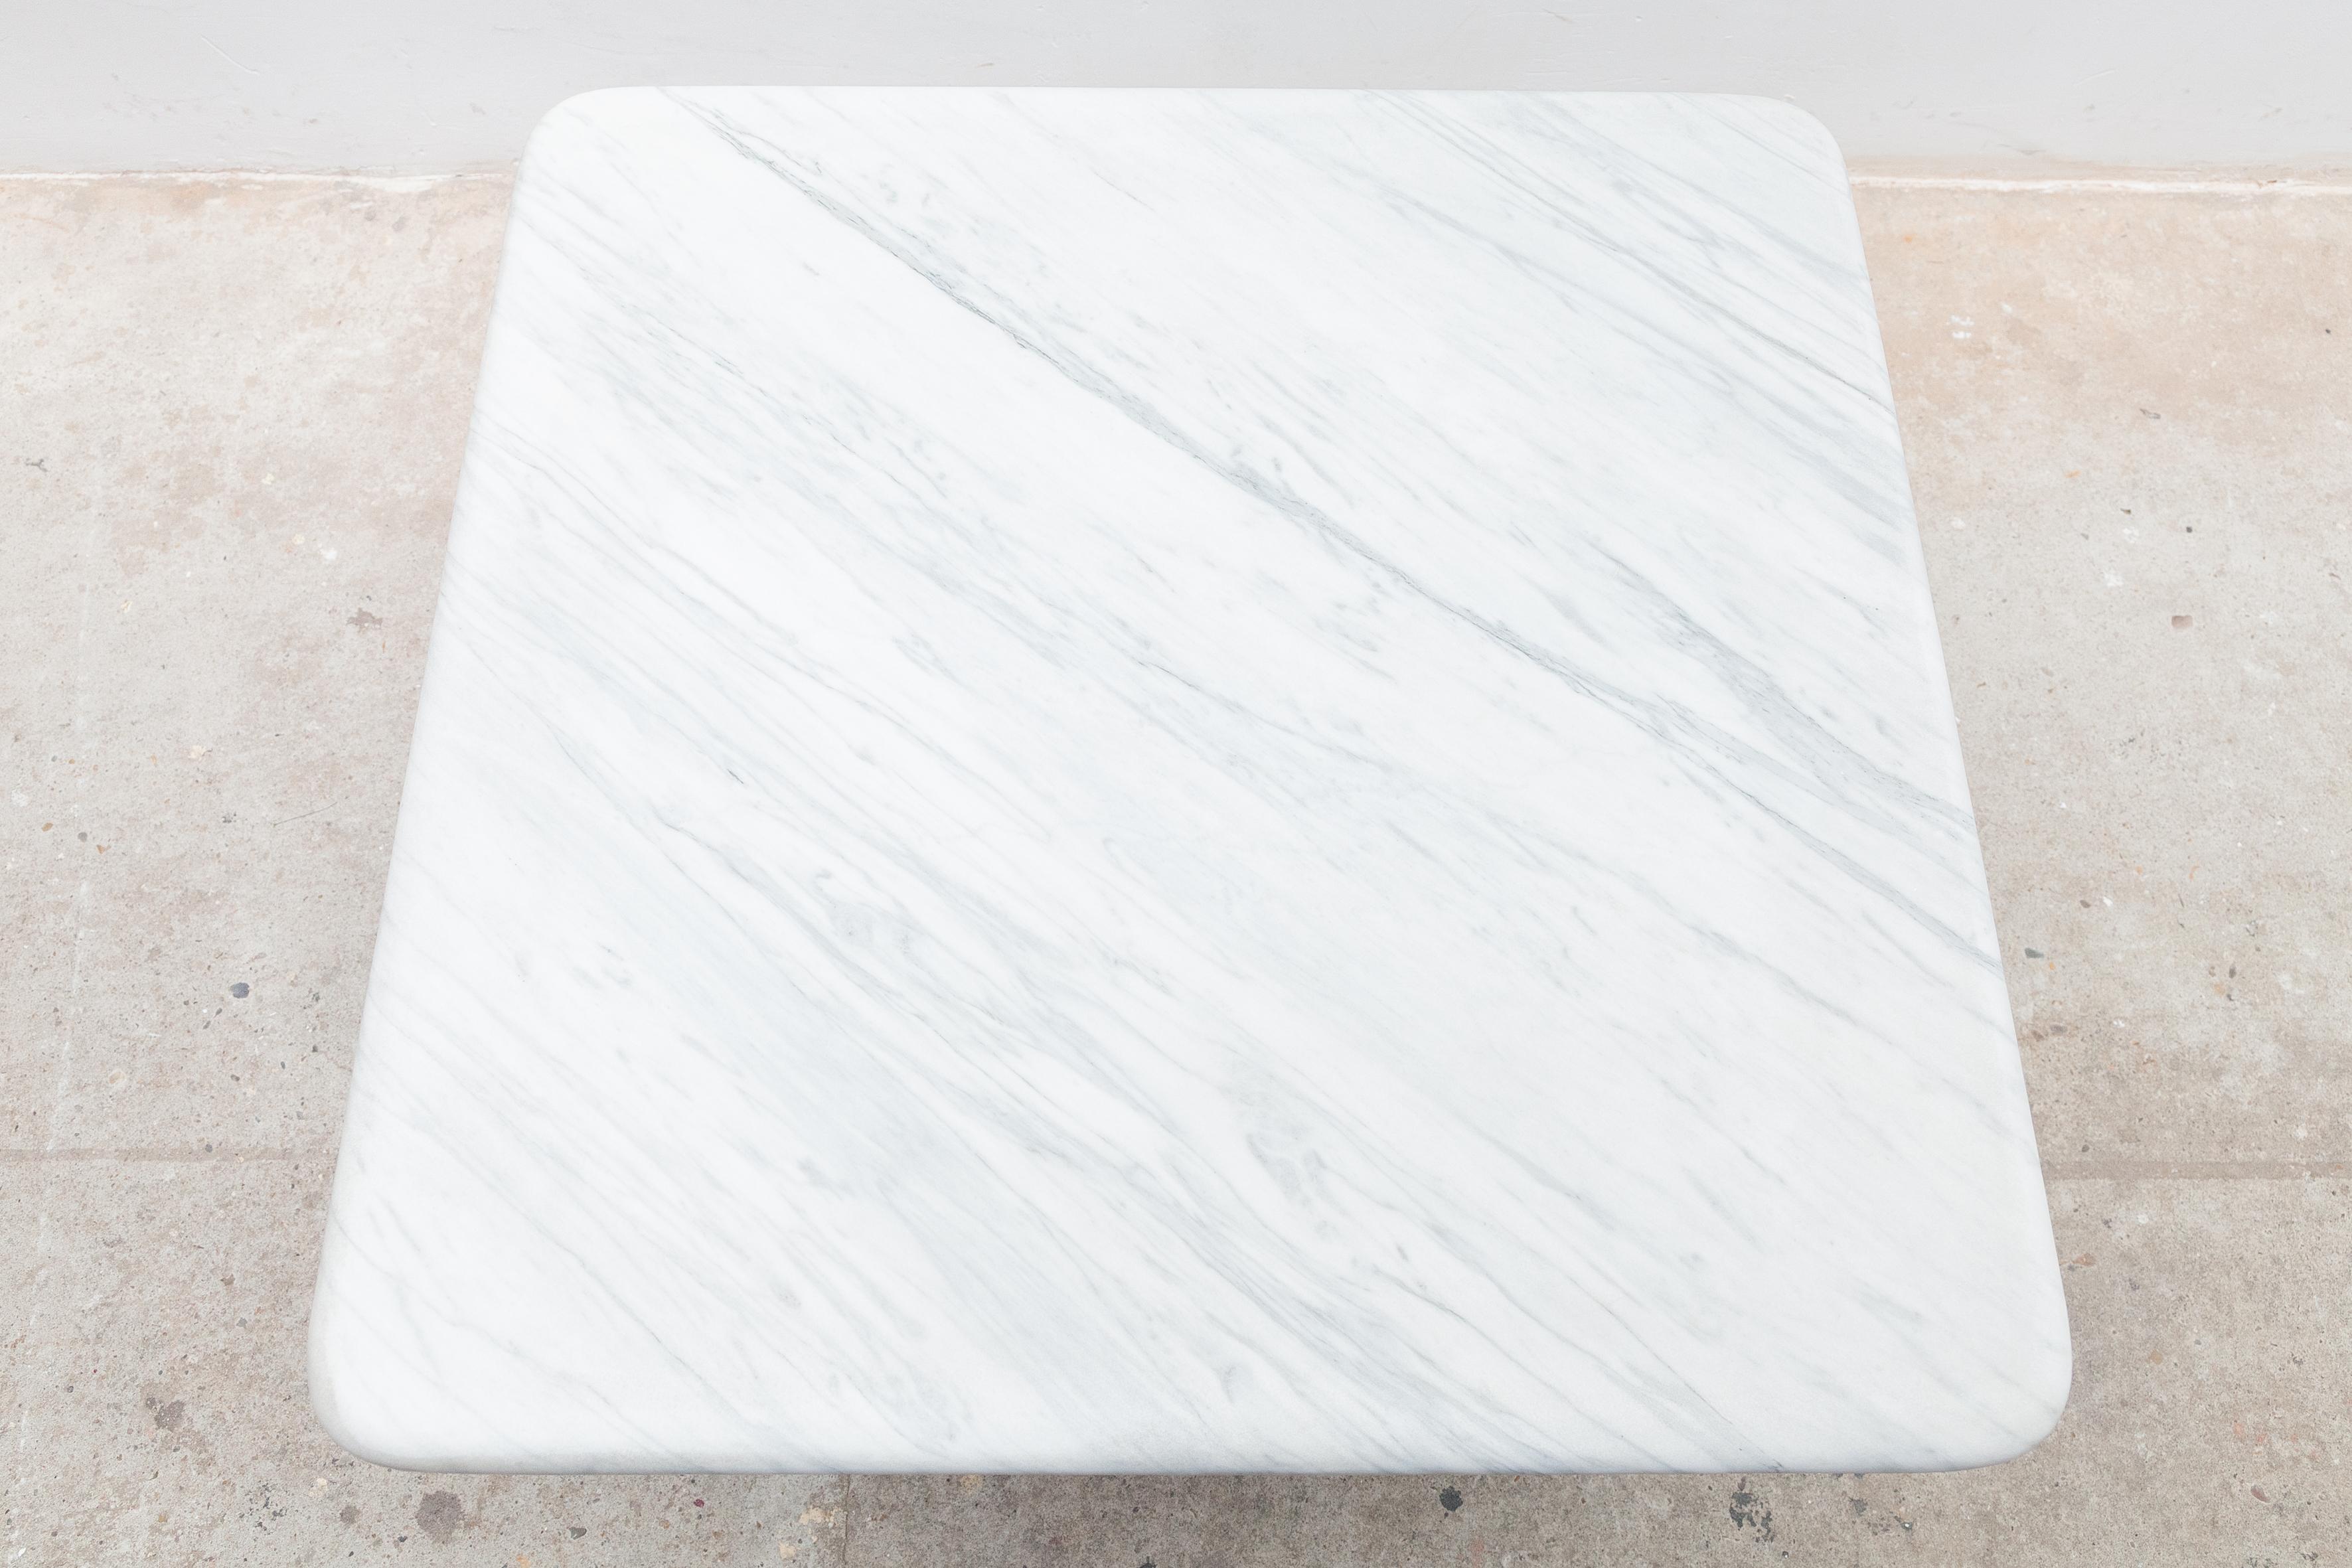 Hand-Crafted White Carrara Marble Coffee-Table, 1970s Italy